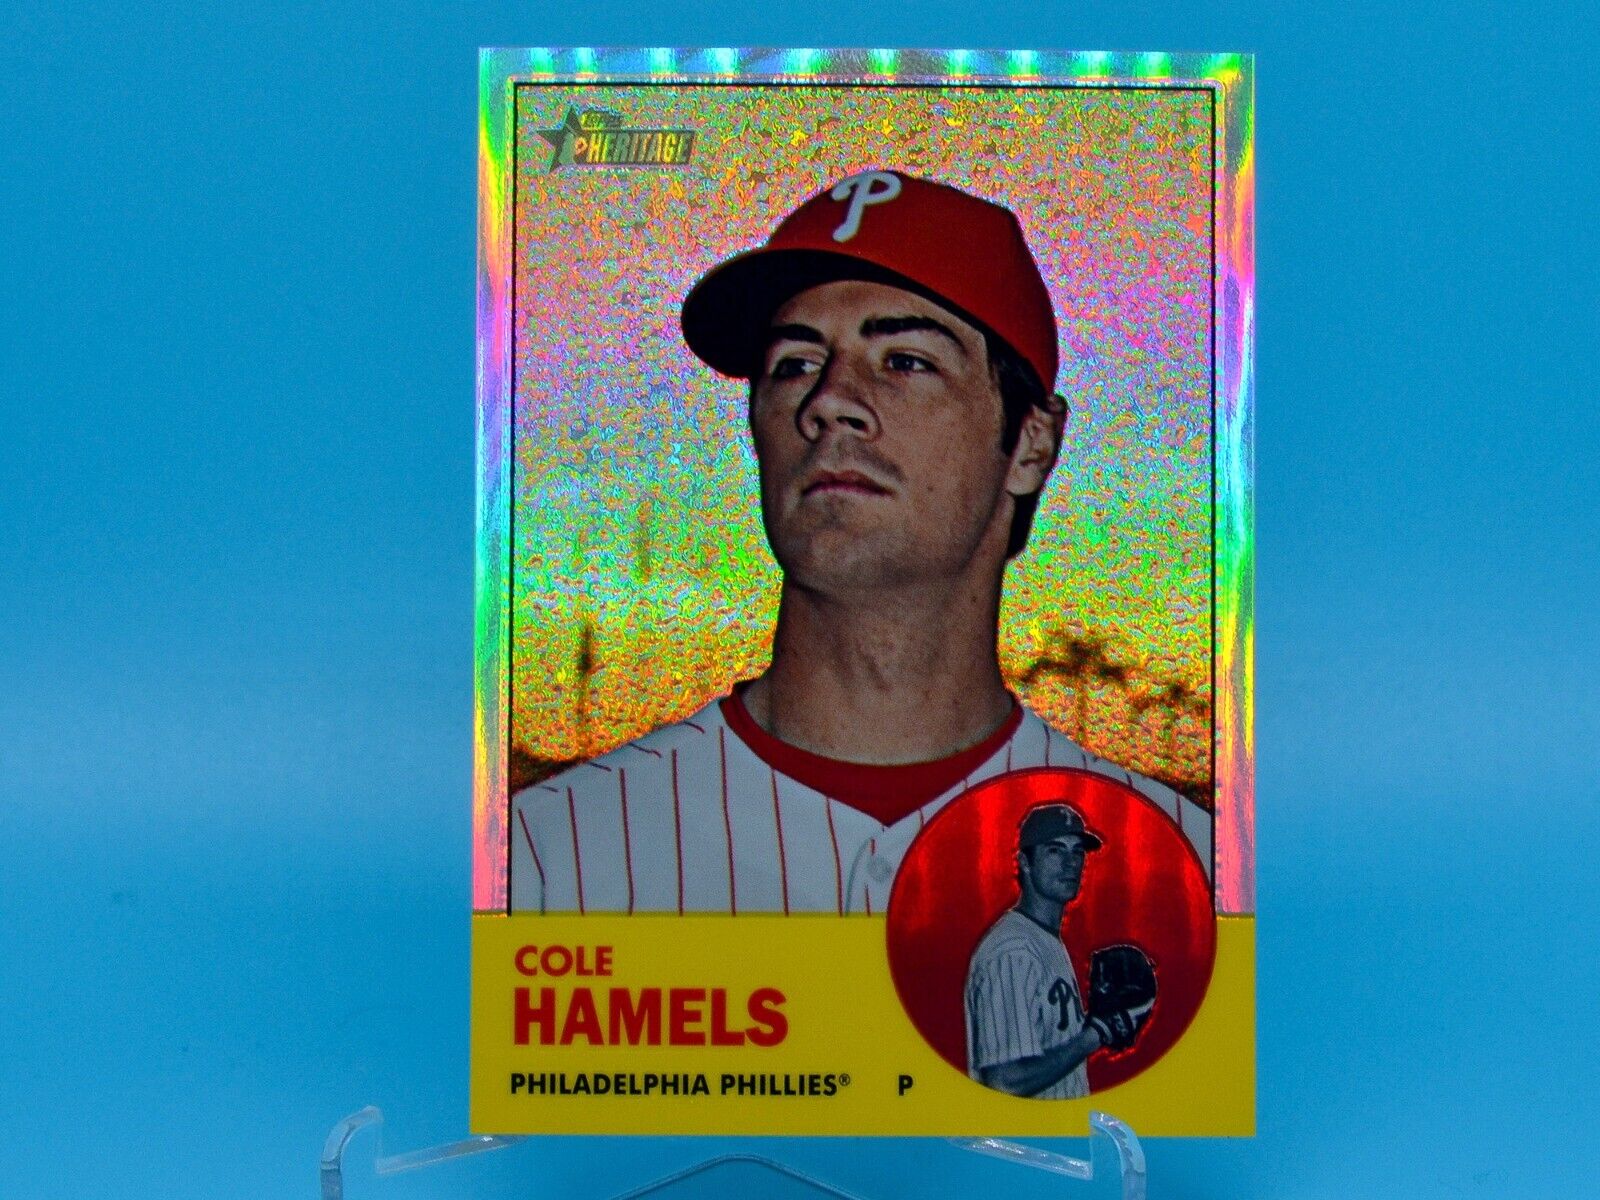 2012 Topps Heritage COLE HAMELS Chrome Refractor /563 • Phillies #HP48